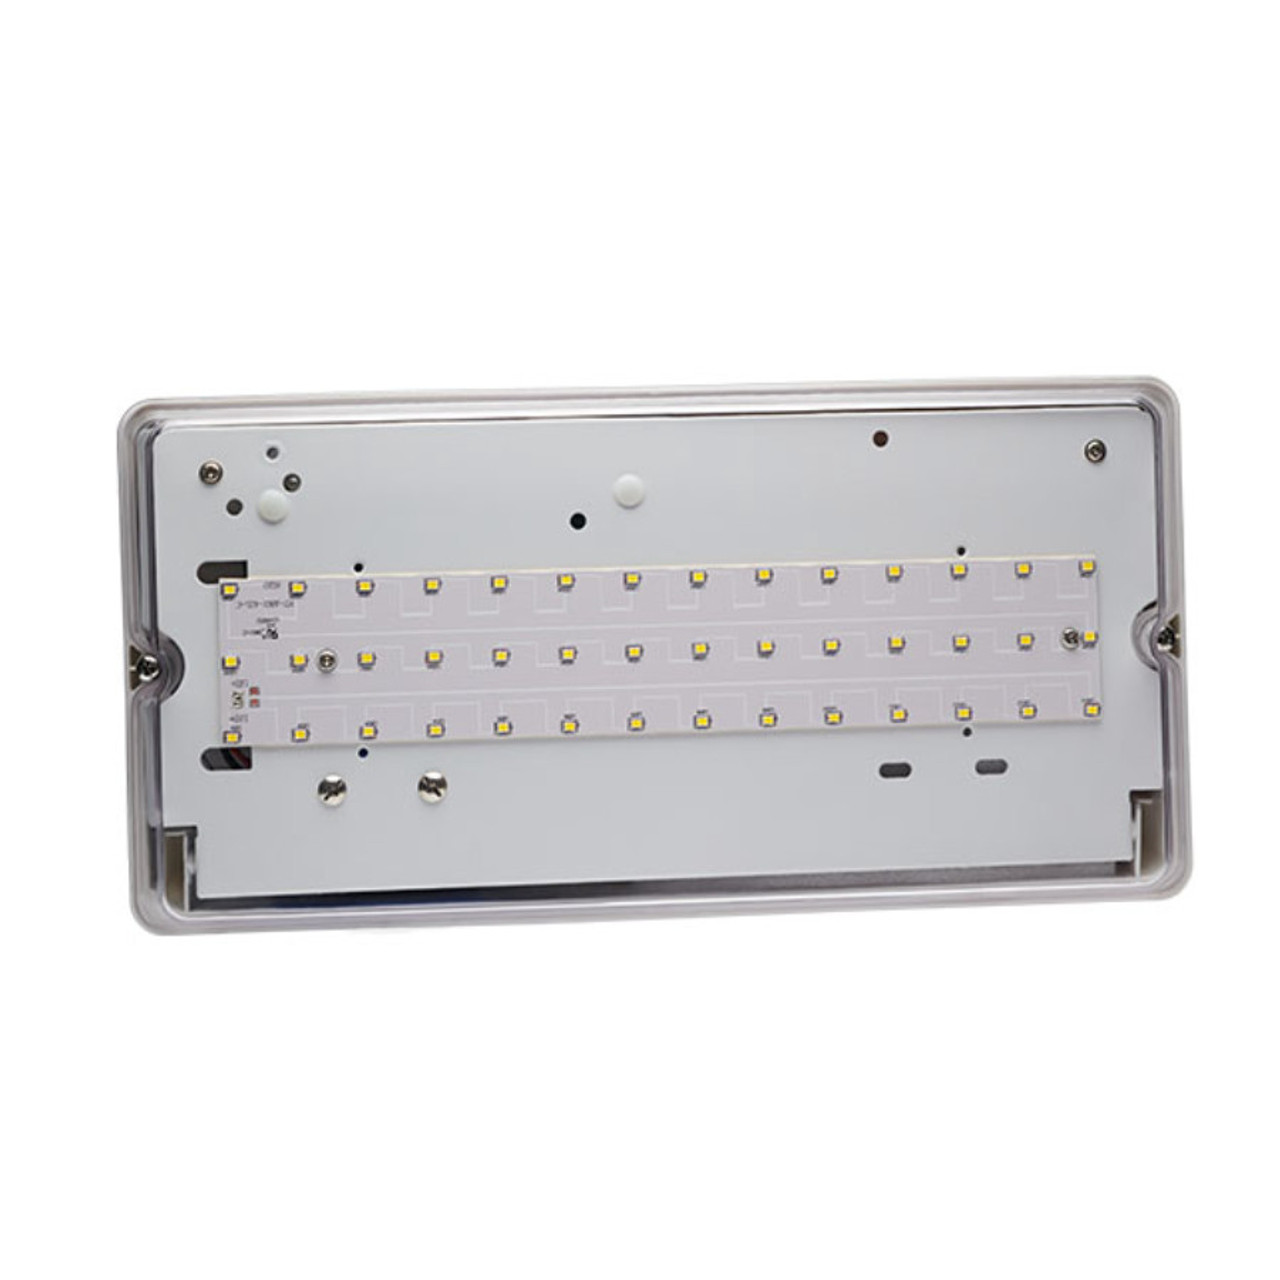 7W Spectrum LED Emergency Bulkhead IP65 Non-maintained Self Test